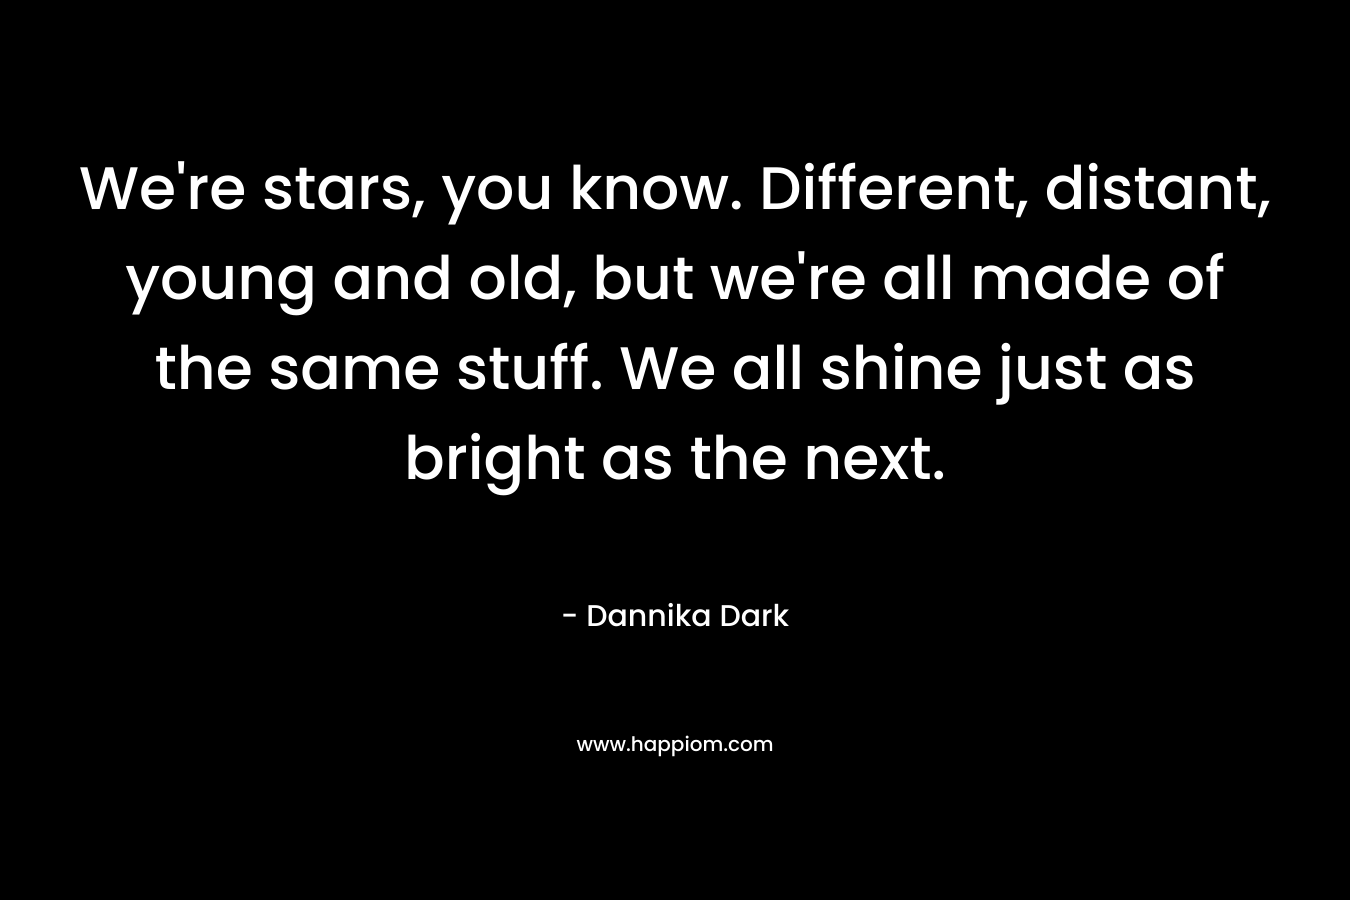 We’re stars, you know. Different, distant, young and old, but we’re all made of the same stuff. We all shine just as bright as the next. – Dannika Dark